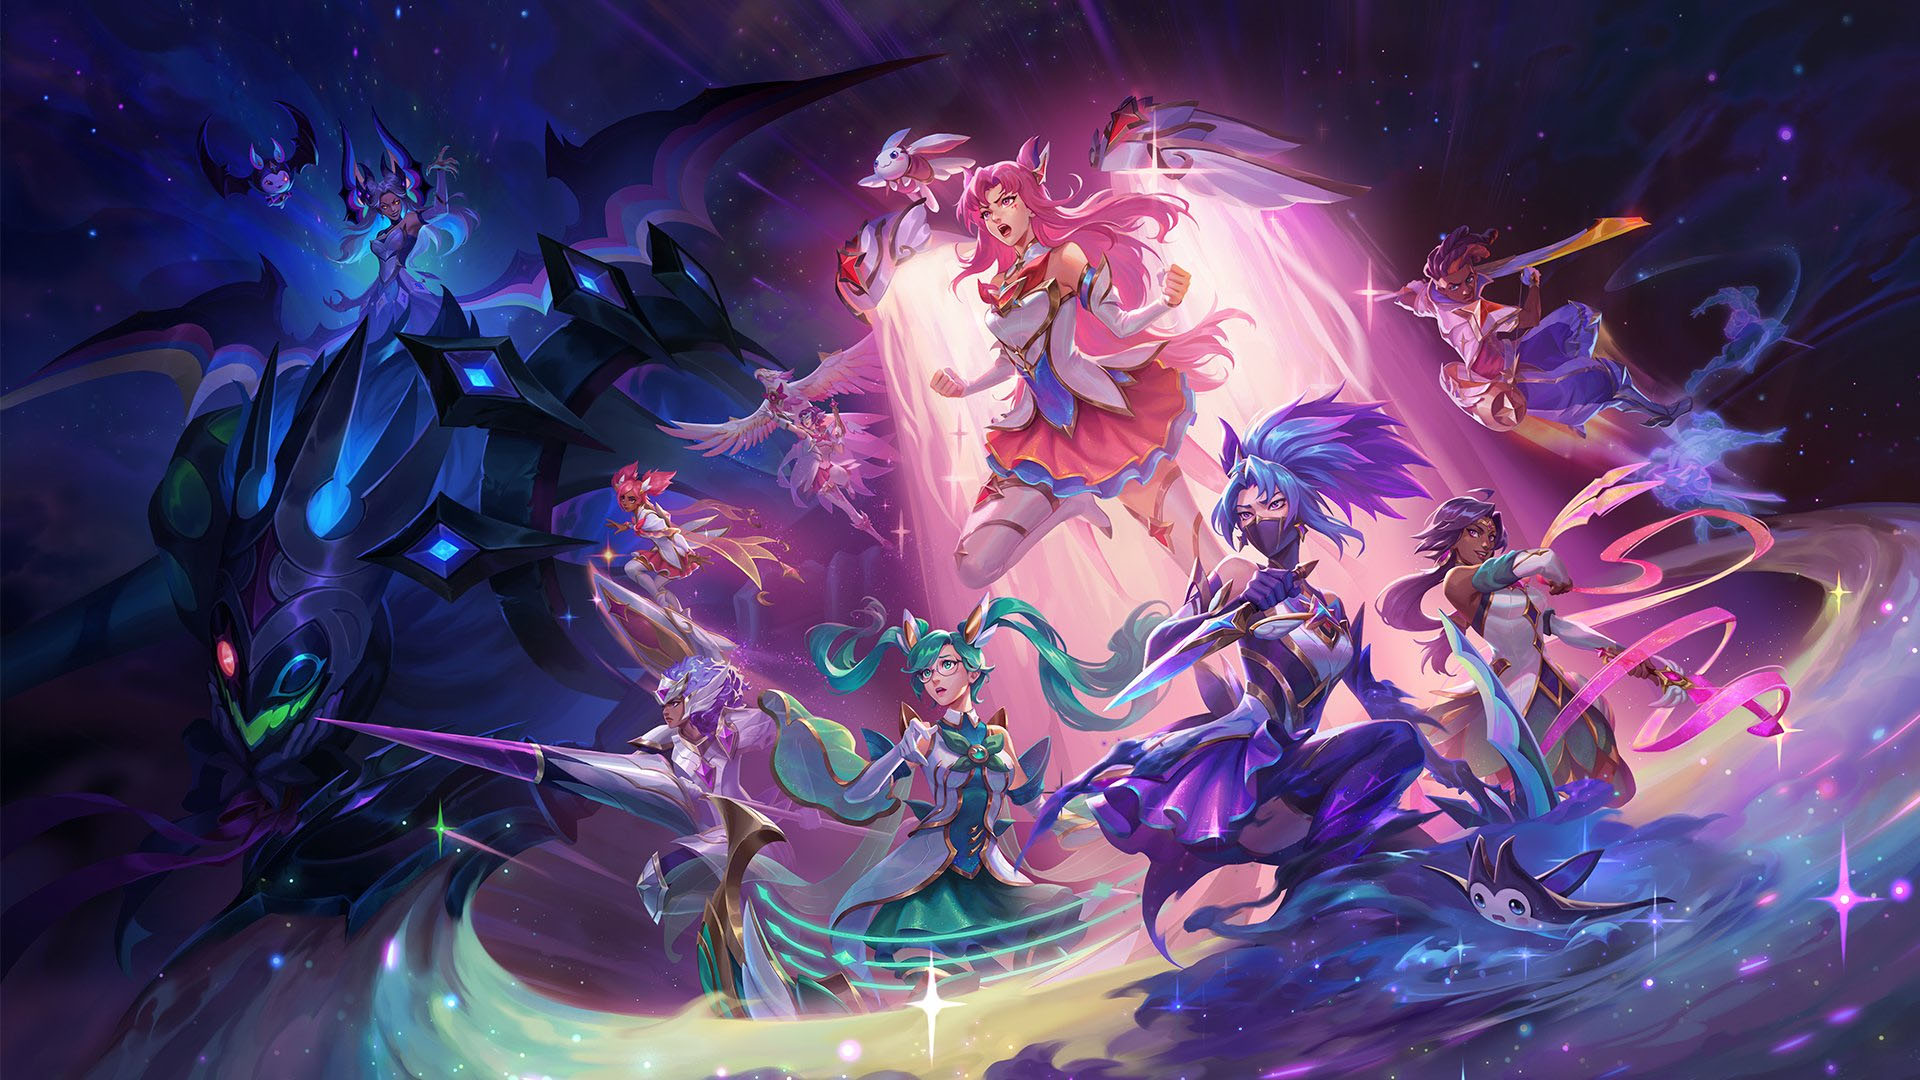 All Star Guardian skins: Complete list, release date, patch, and more